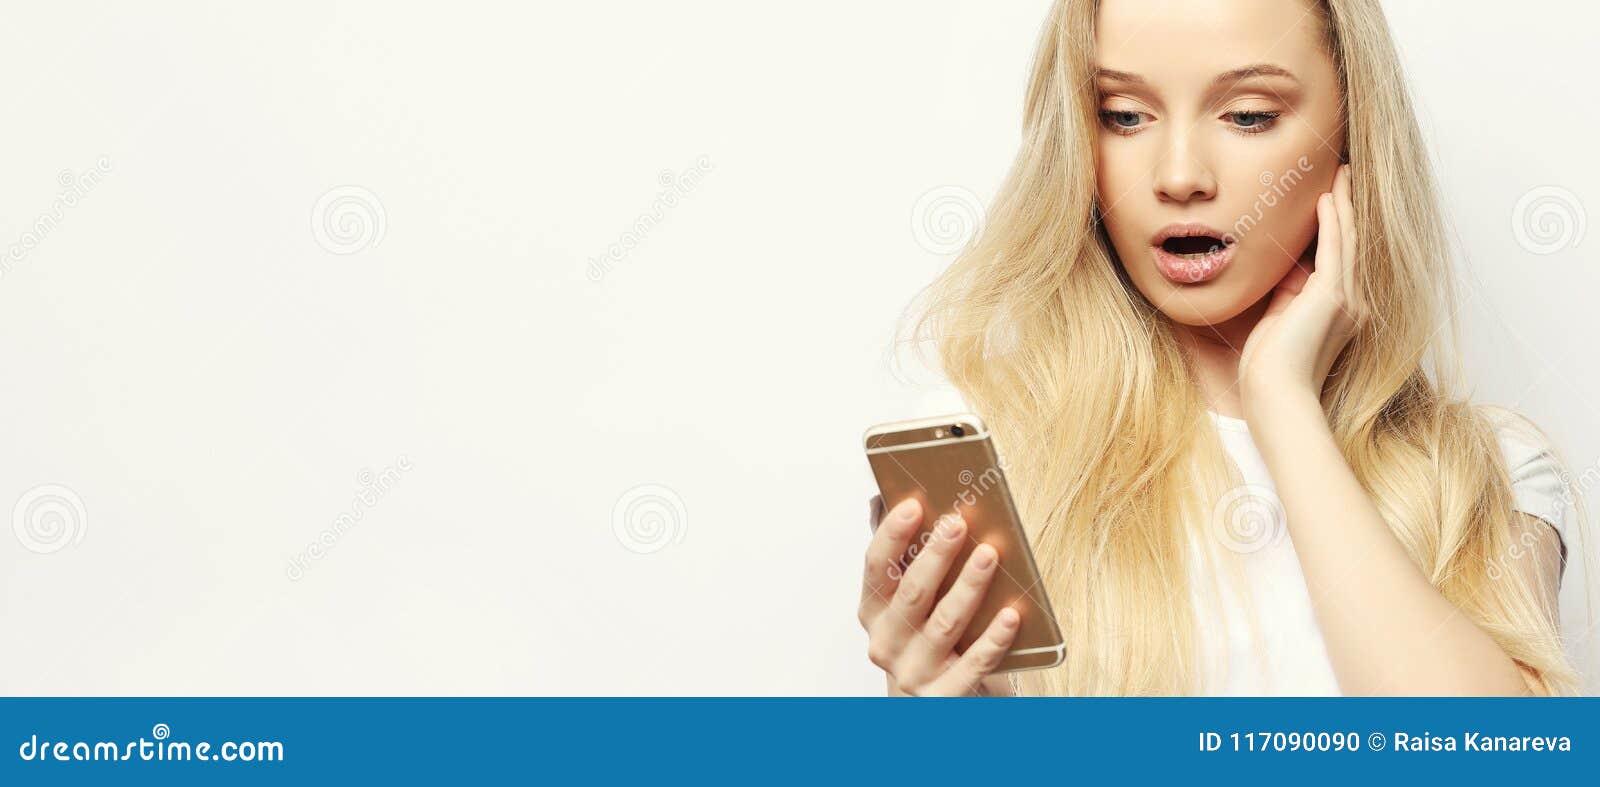 pretty blond woman with long hair holds modern smart phone, recieves unexpcted message from friend, reads reminder